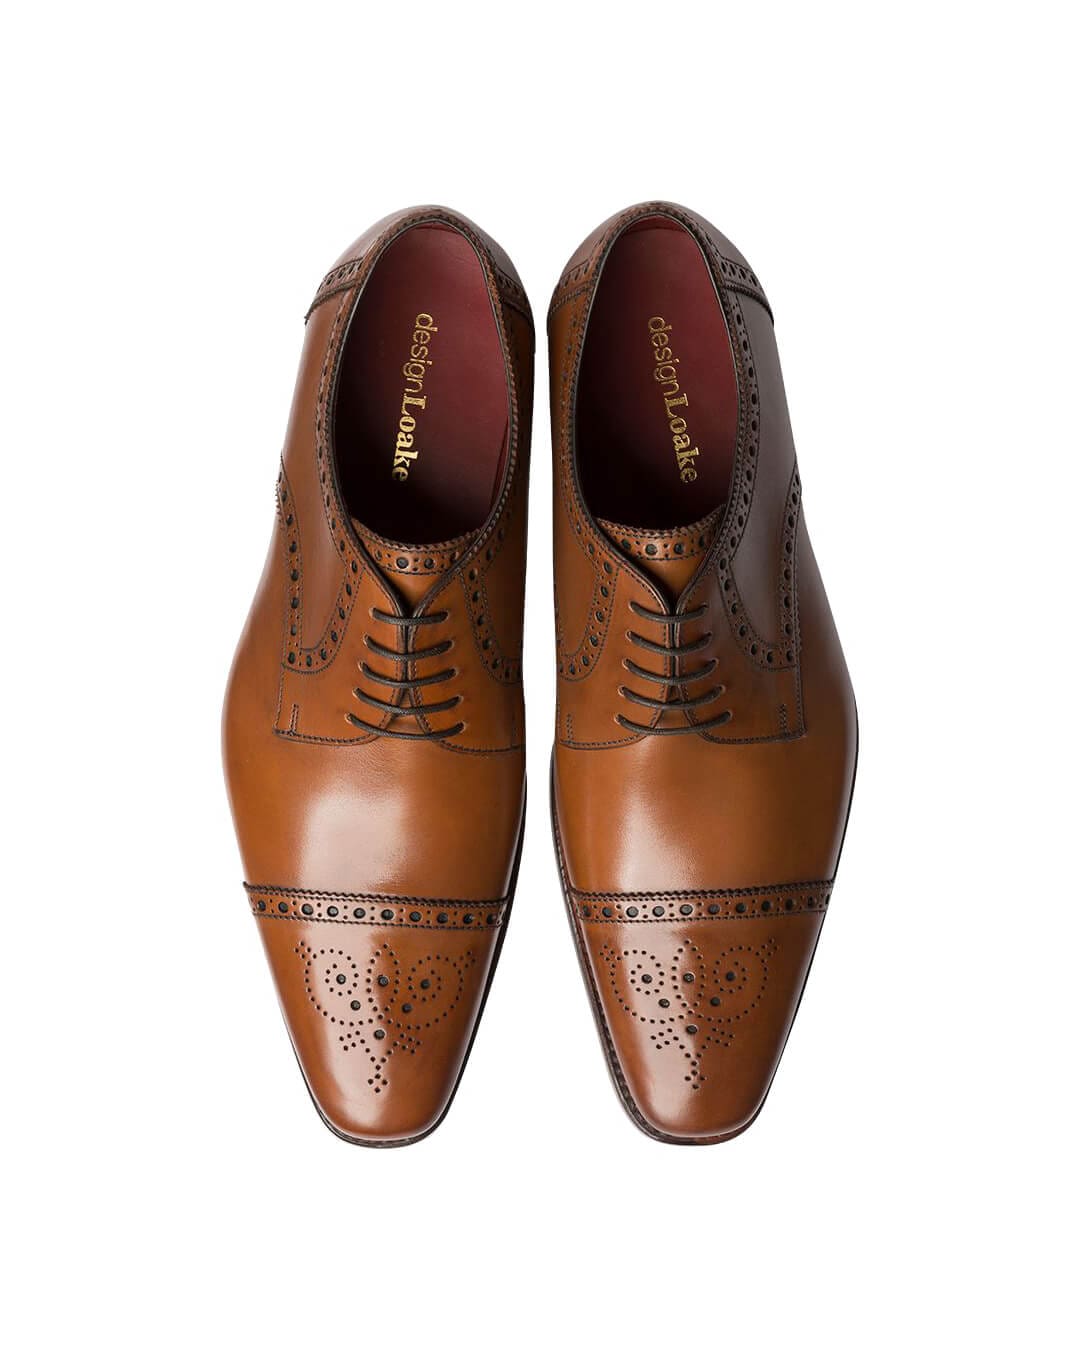 Loake Shoes Loake Brown Foley Derby Brogued Shoes